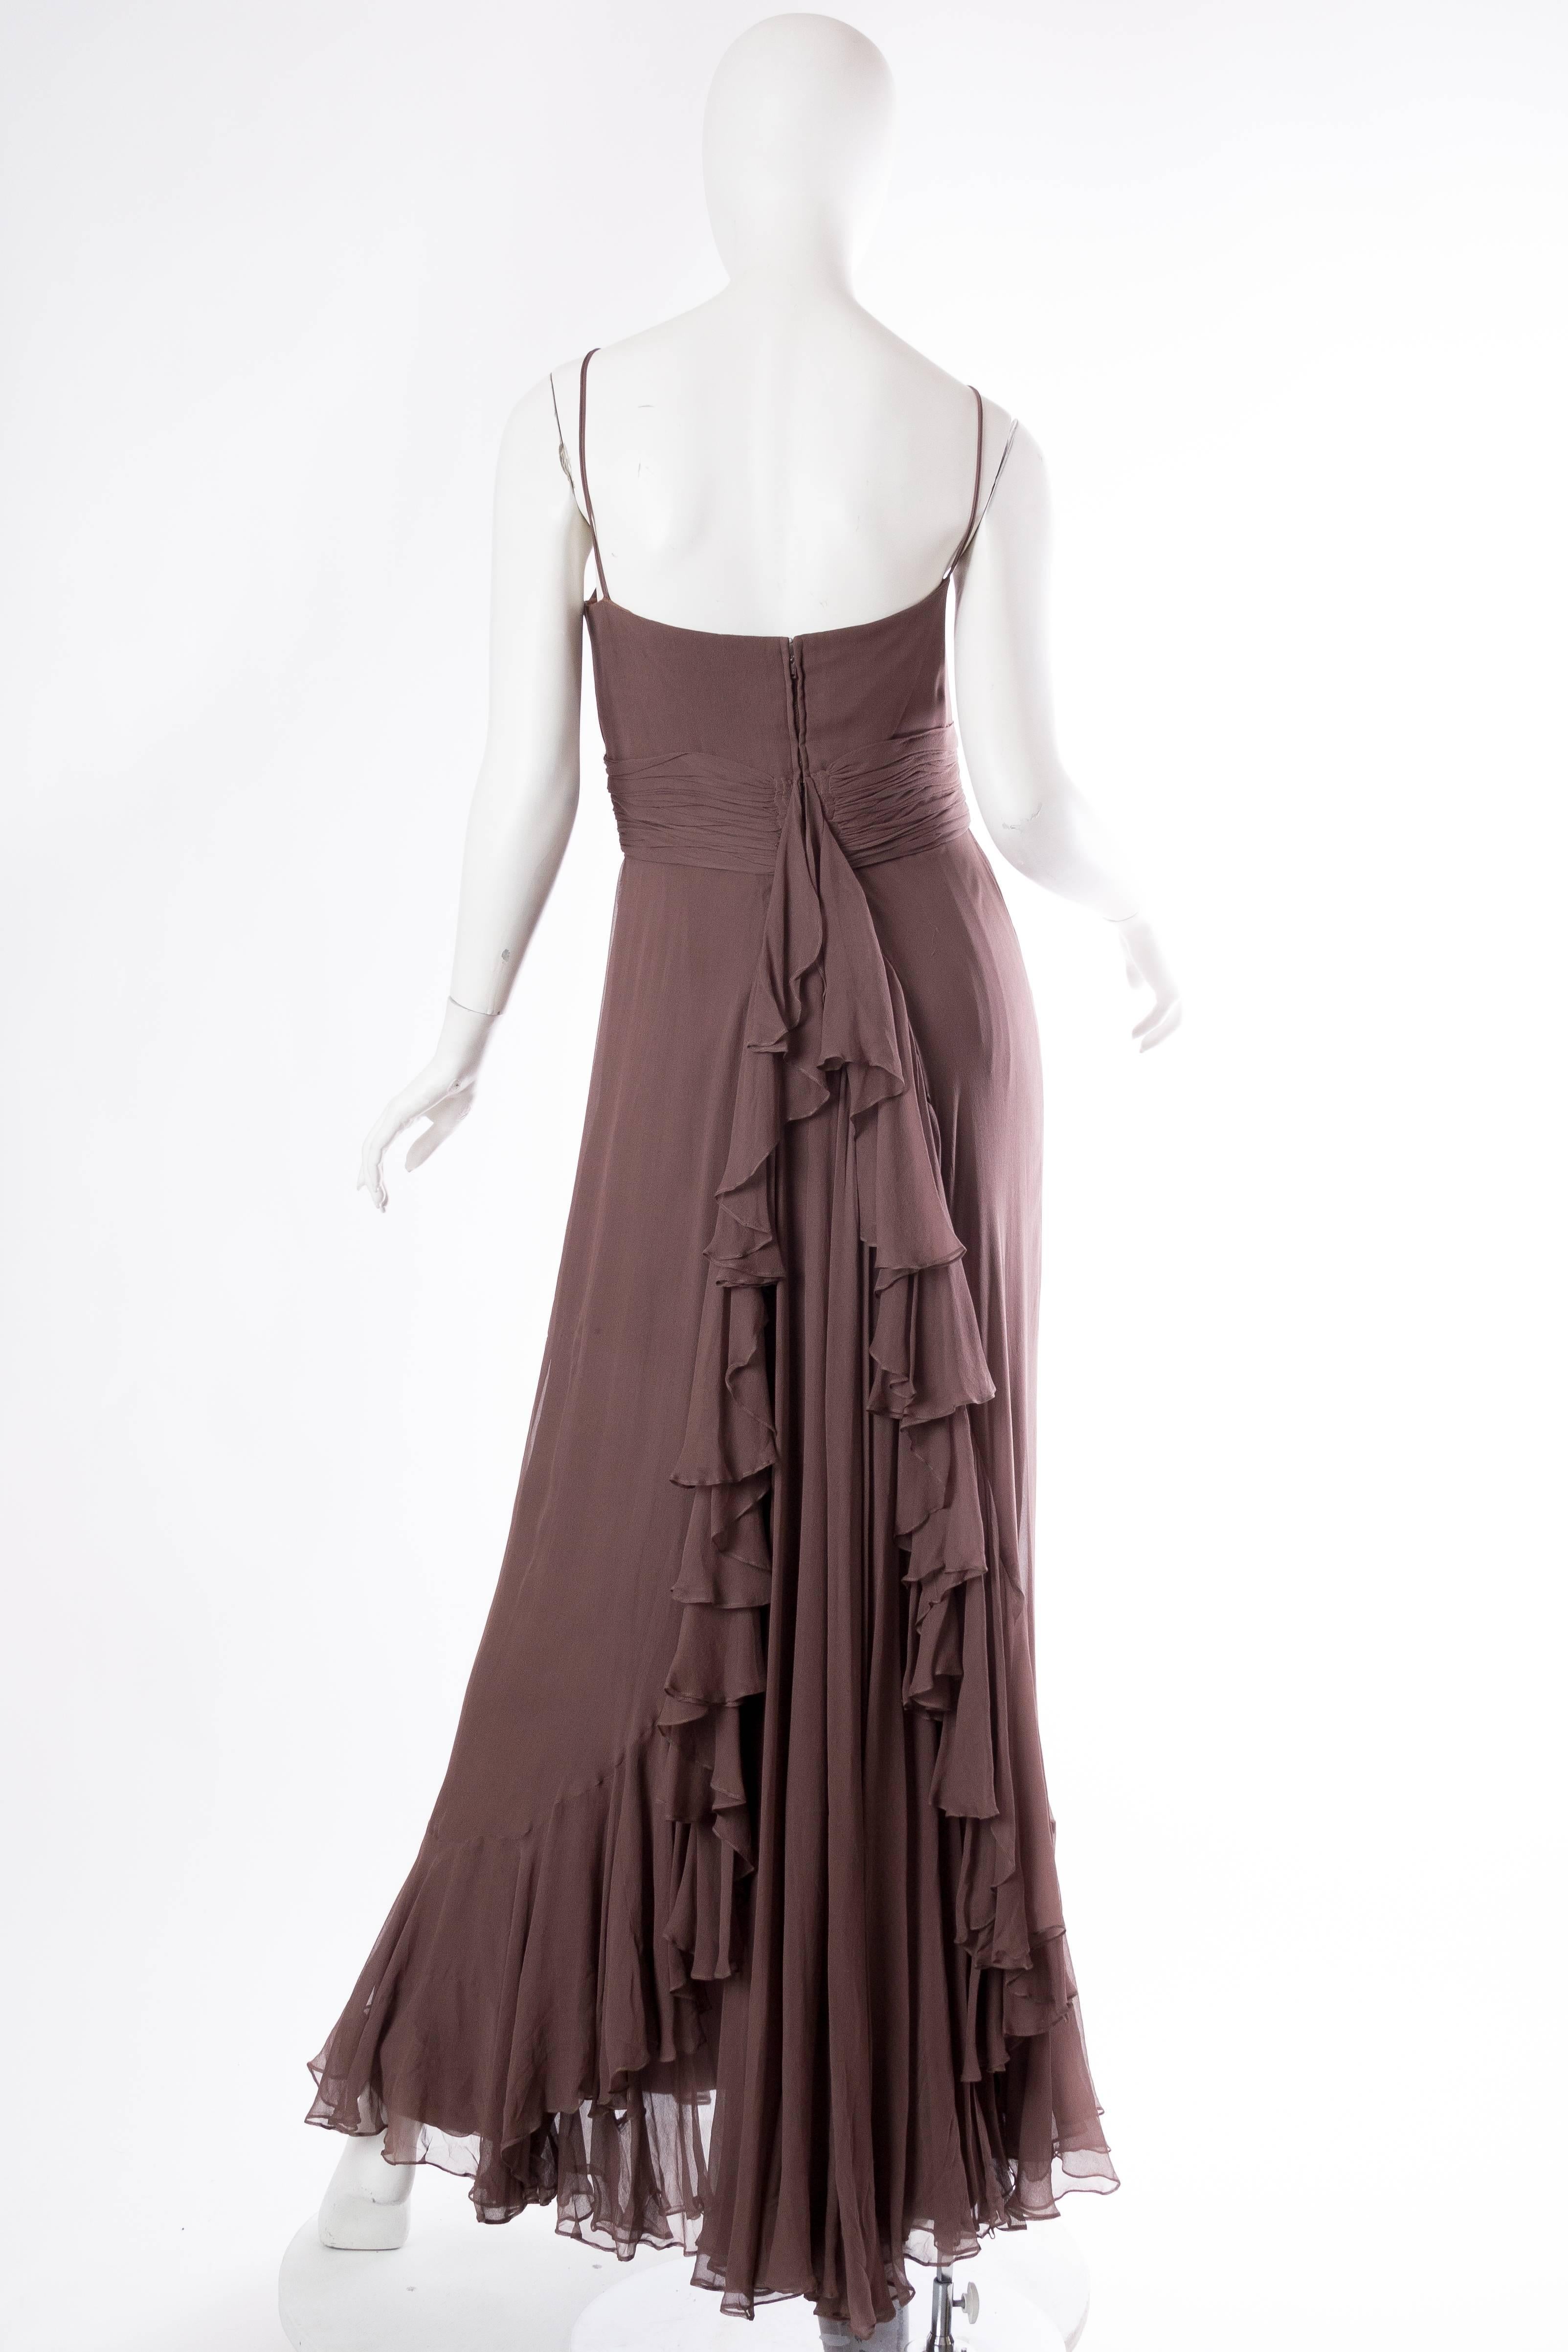 1970S MALCOLM STARR Chocolate Brown Silk Chiffon Boho Ruffled Gown For Sale 2